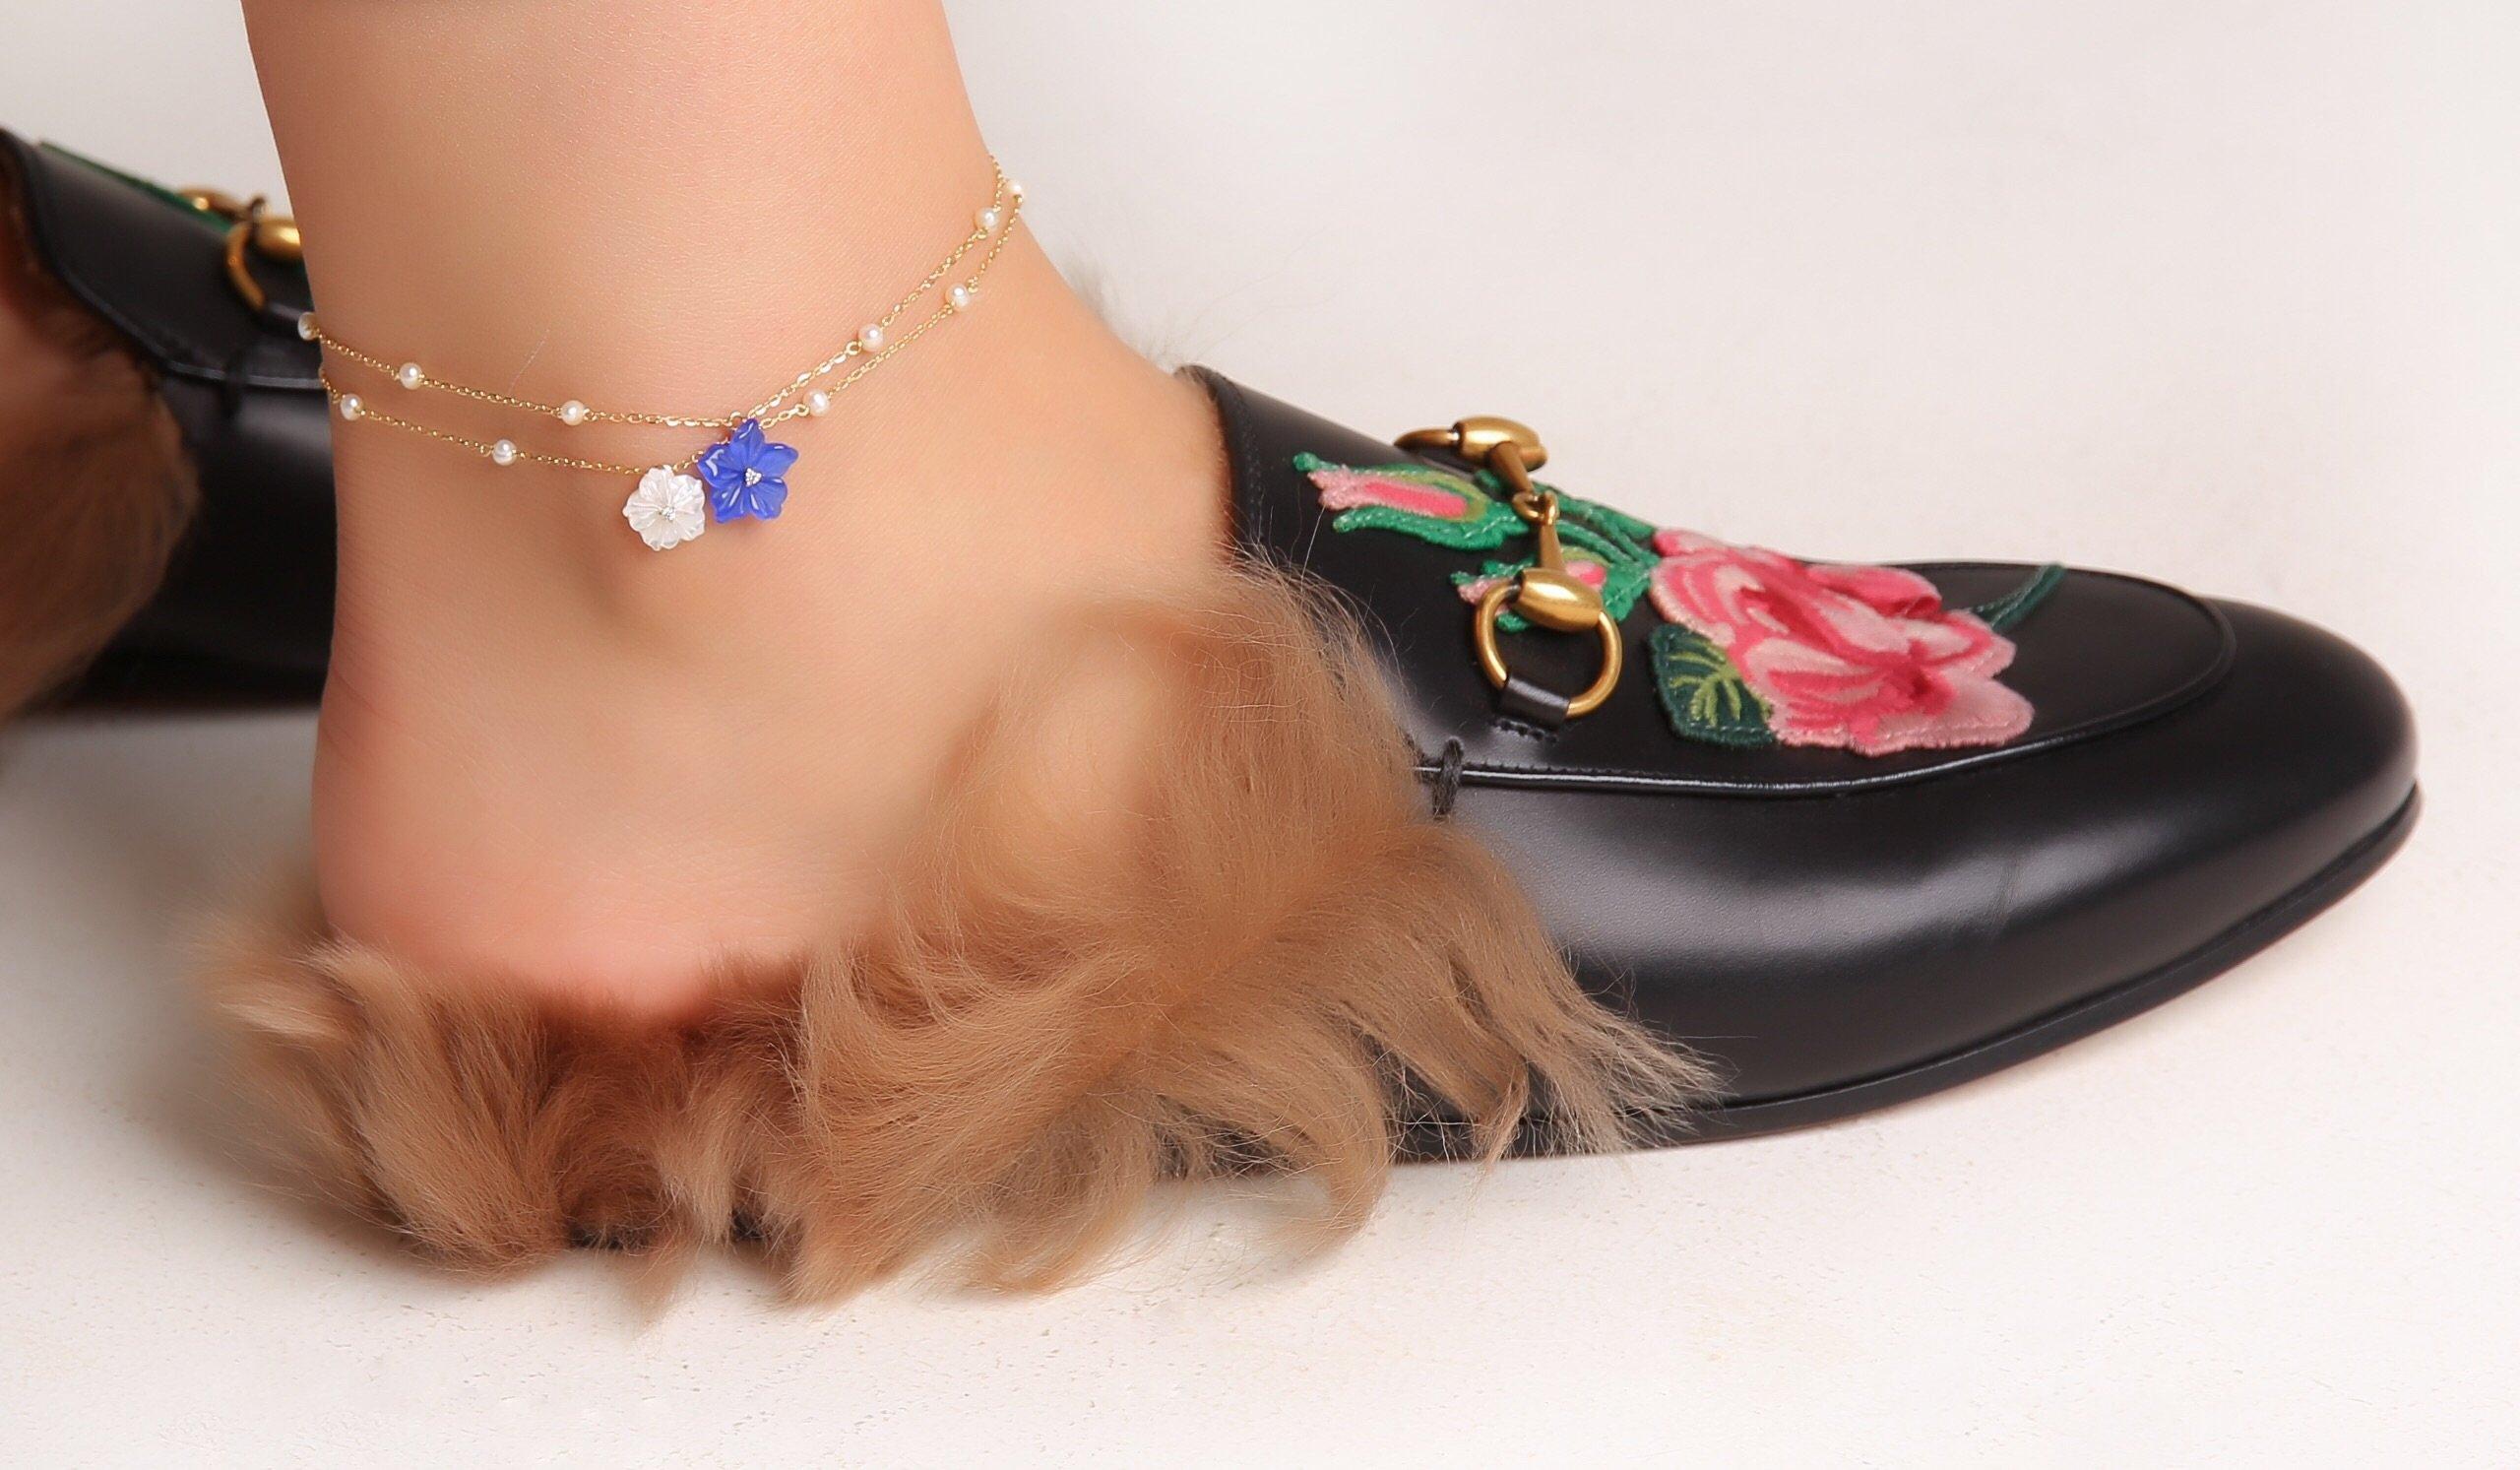 This anklet will look great with your favorite pair of sandals and your best dress or jeans, whichever way you can imagine spending your day. It is perfect for wearing all day long. It features a mother of pearl stone that spells out an uplifting